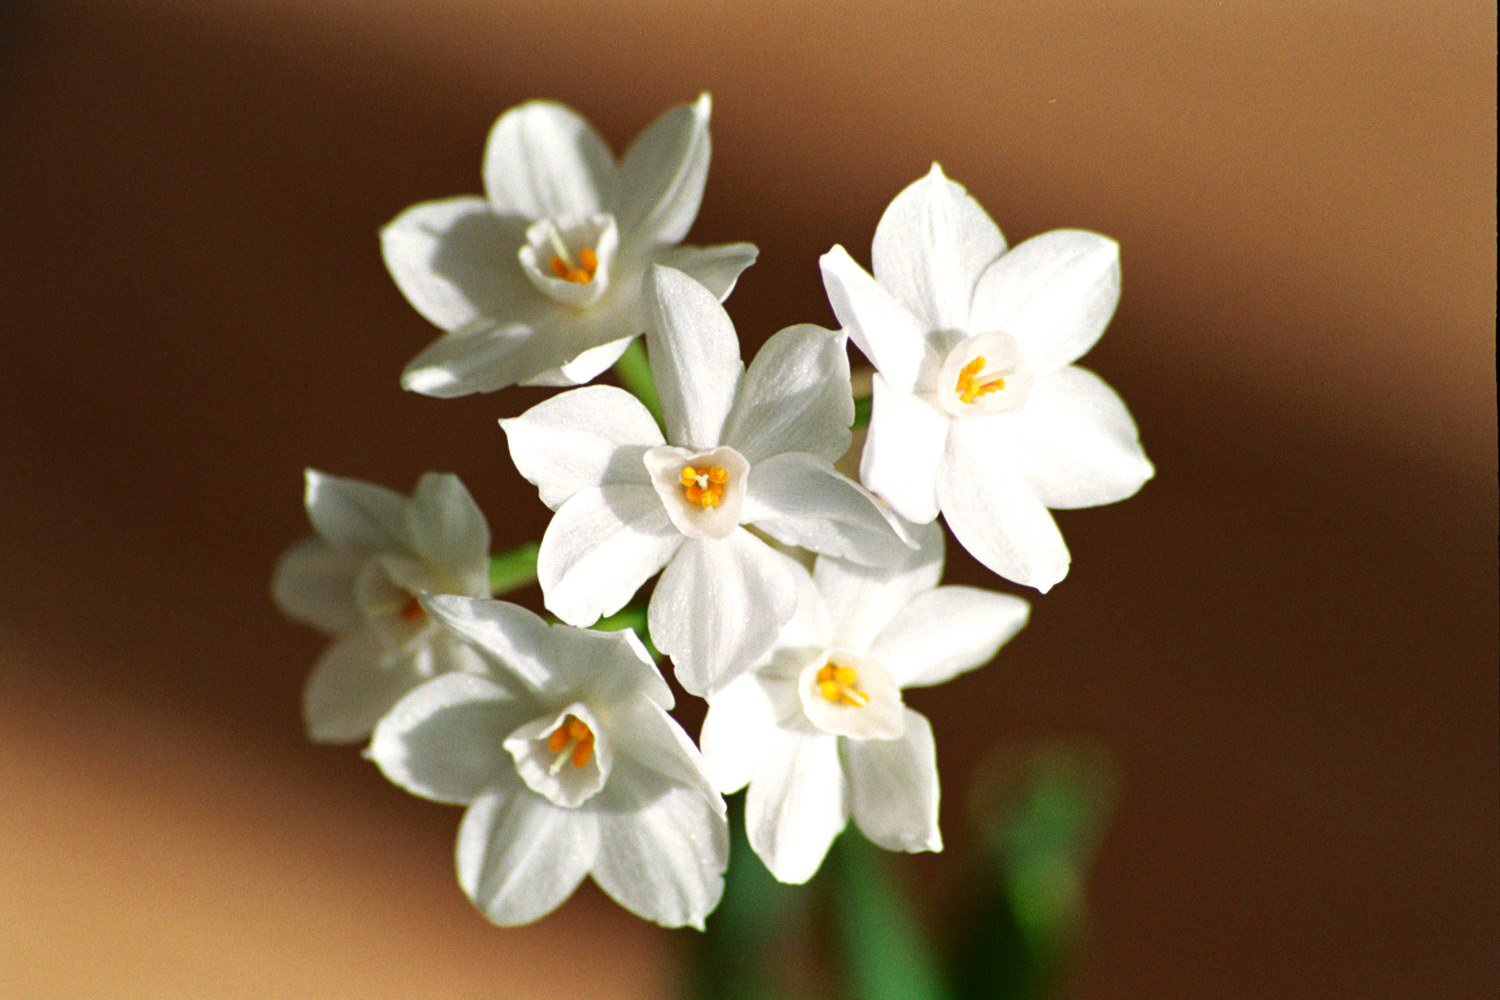 white flowers that are growing in a vase